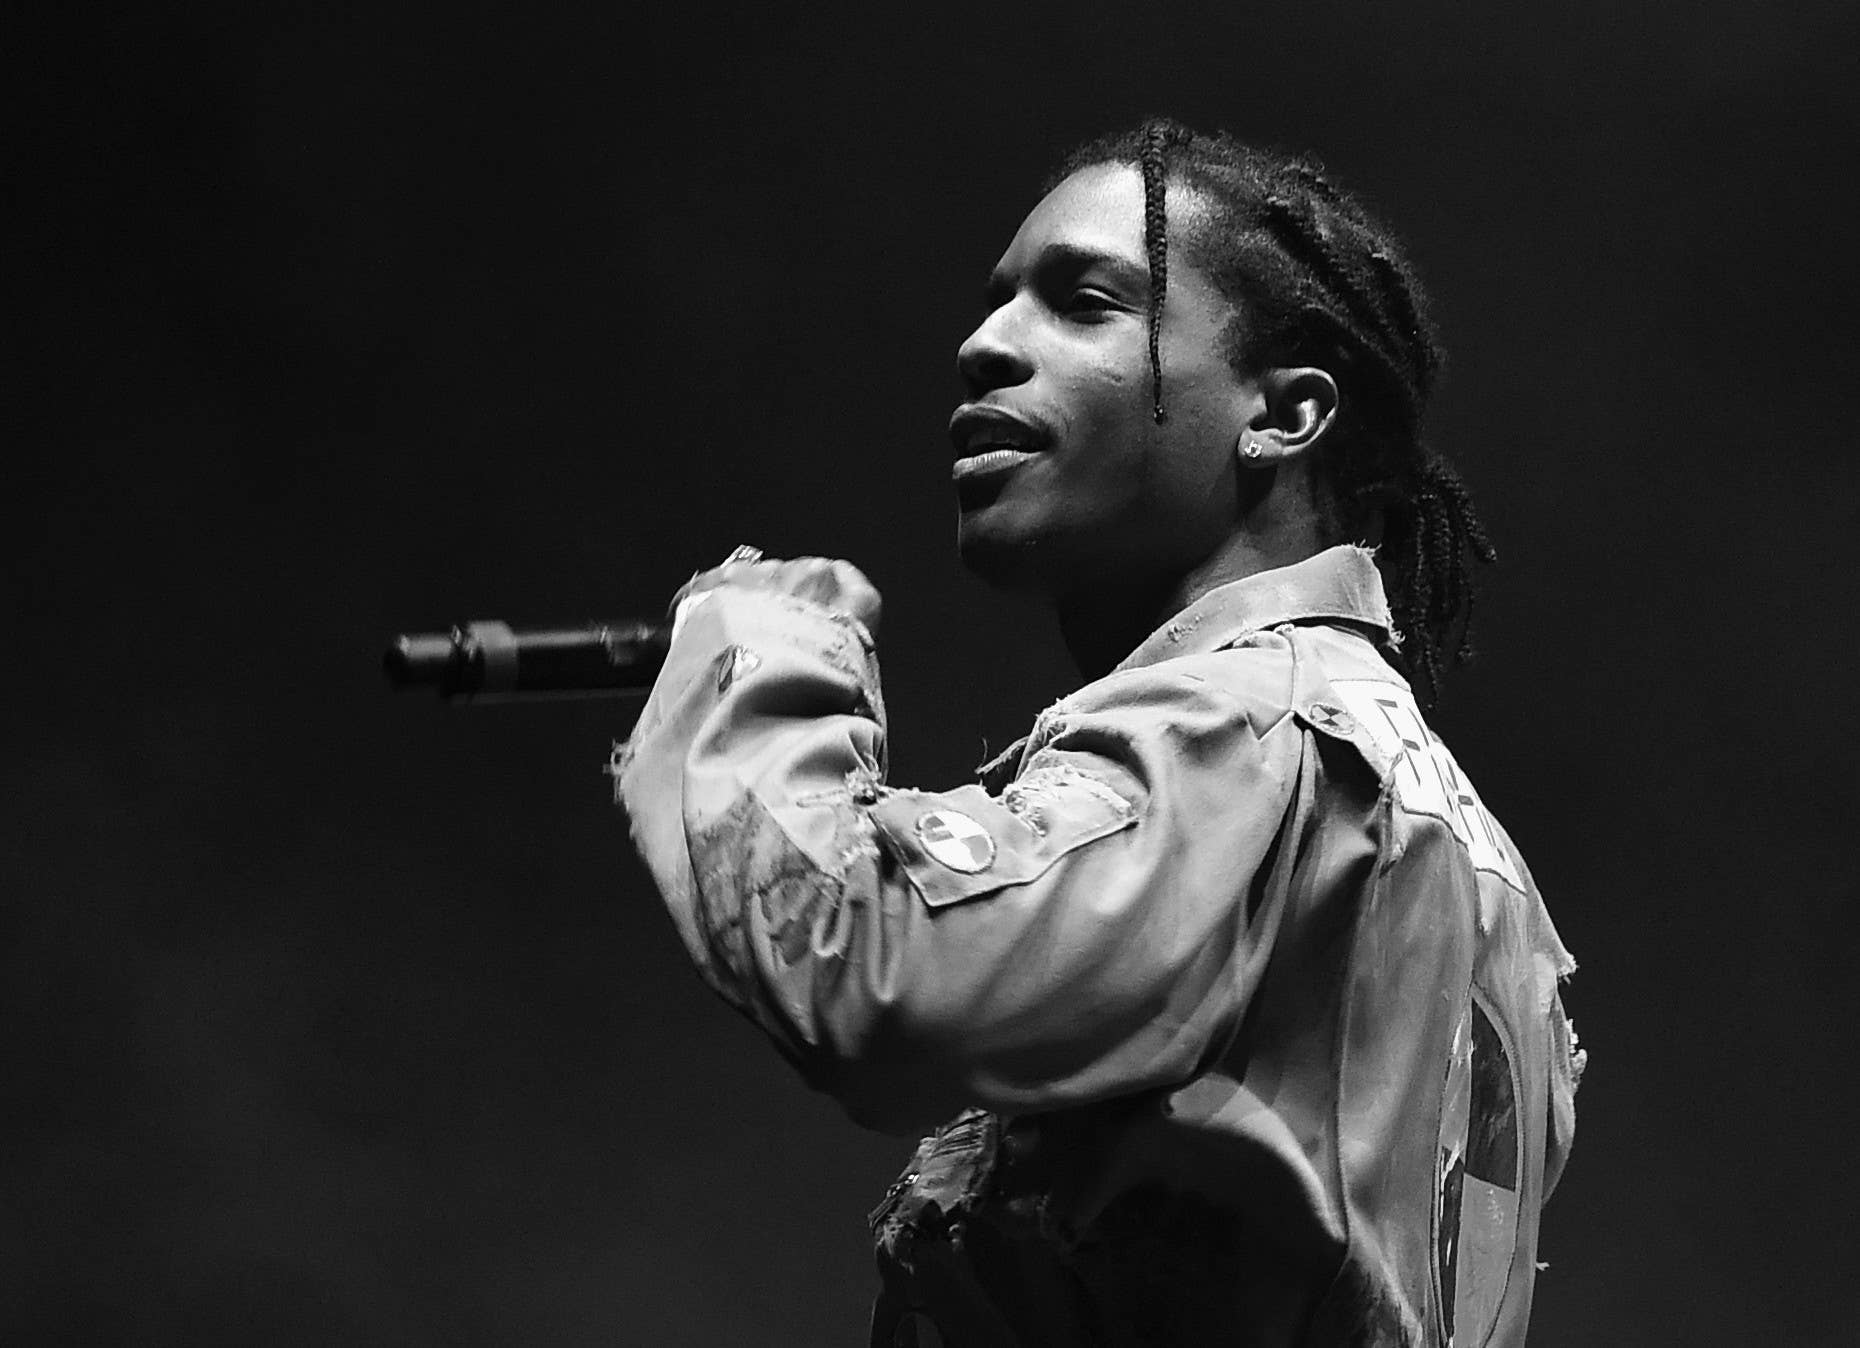 A$AP Rocky is dropping more pairs of his hyped Vans slip-on sneakers